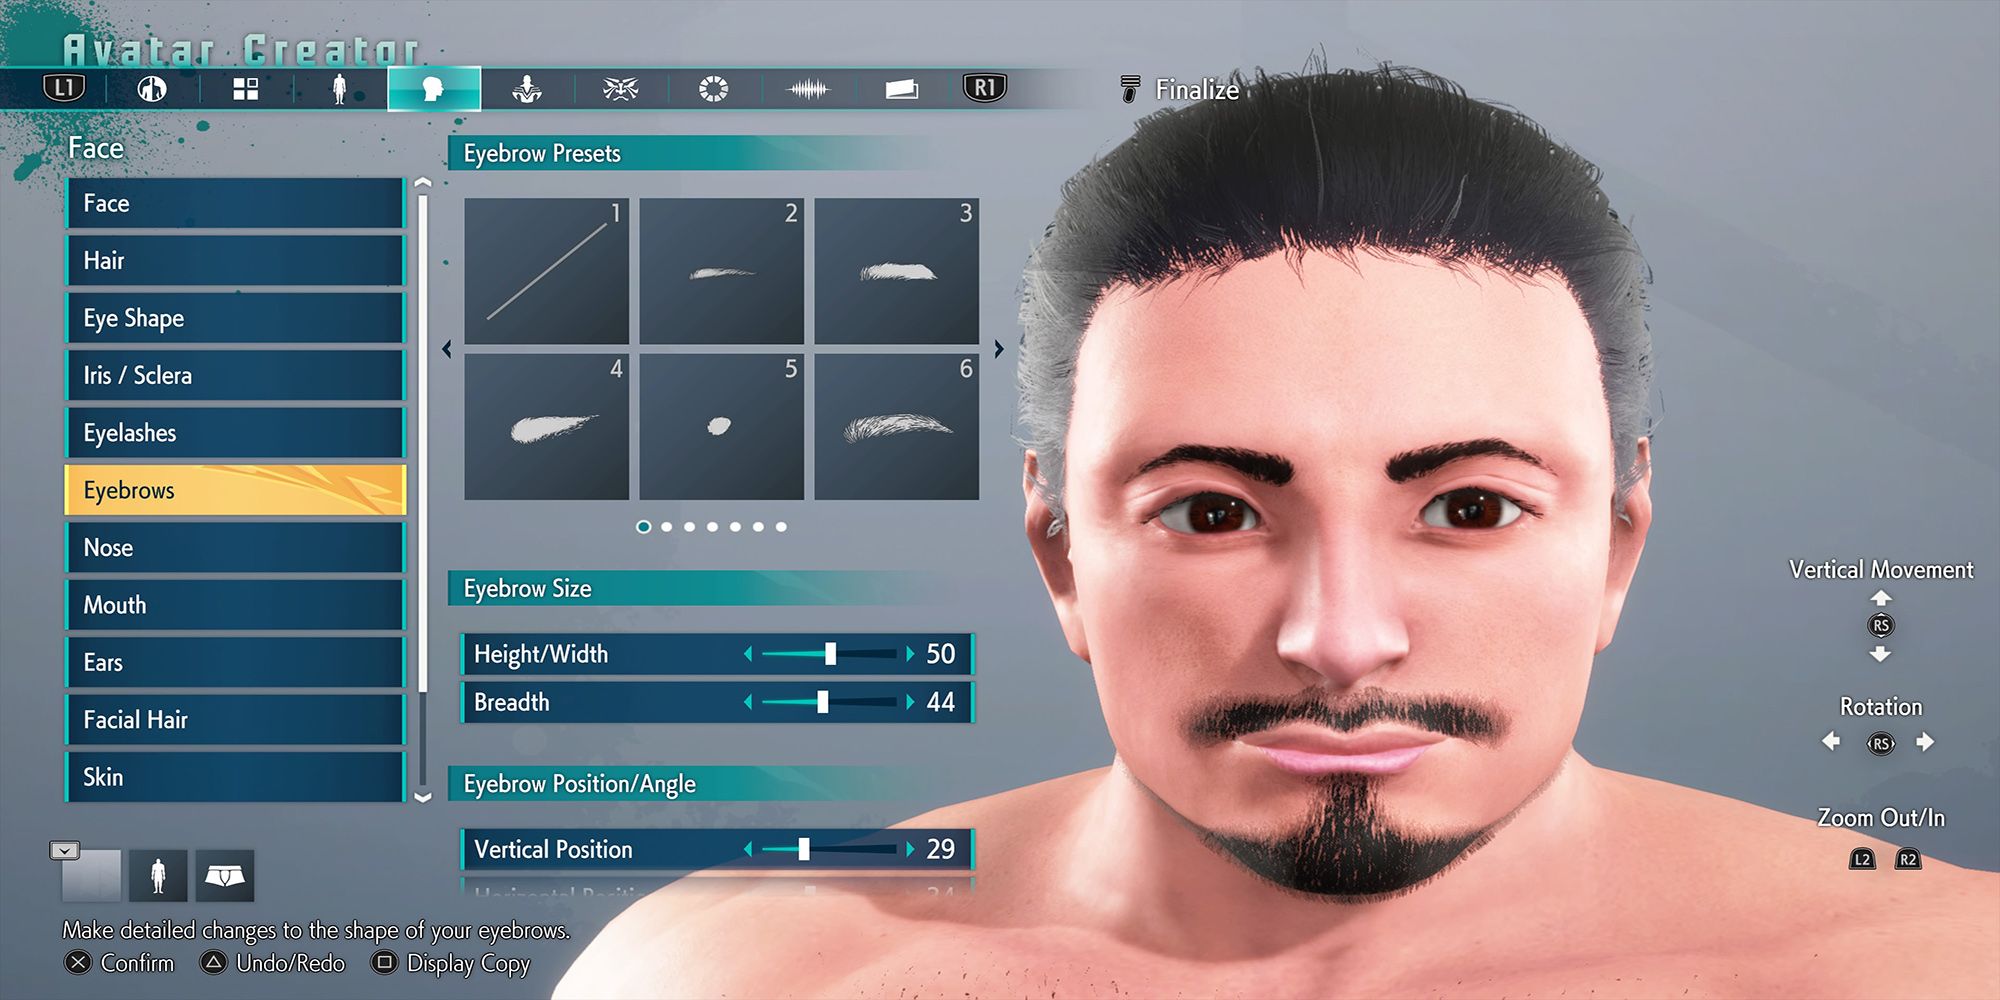 The Eyebrow Settings menu from Street Fighter 6's avatar creator.